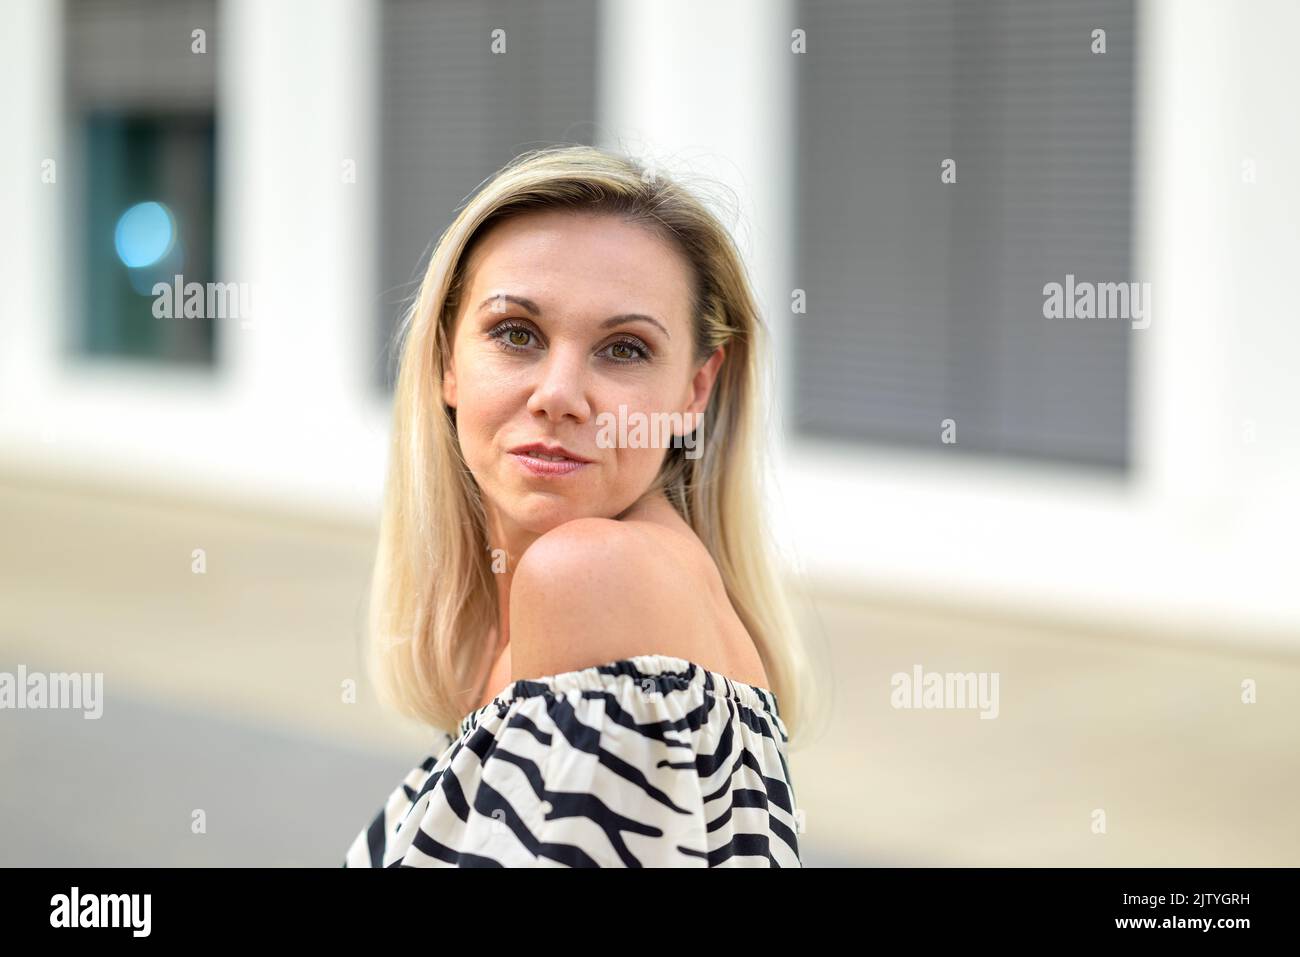 Pretty middle aged blond woman turning to look at the camera with a smile in a close up outdoor portrait Stock Photo